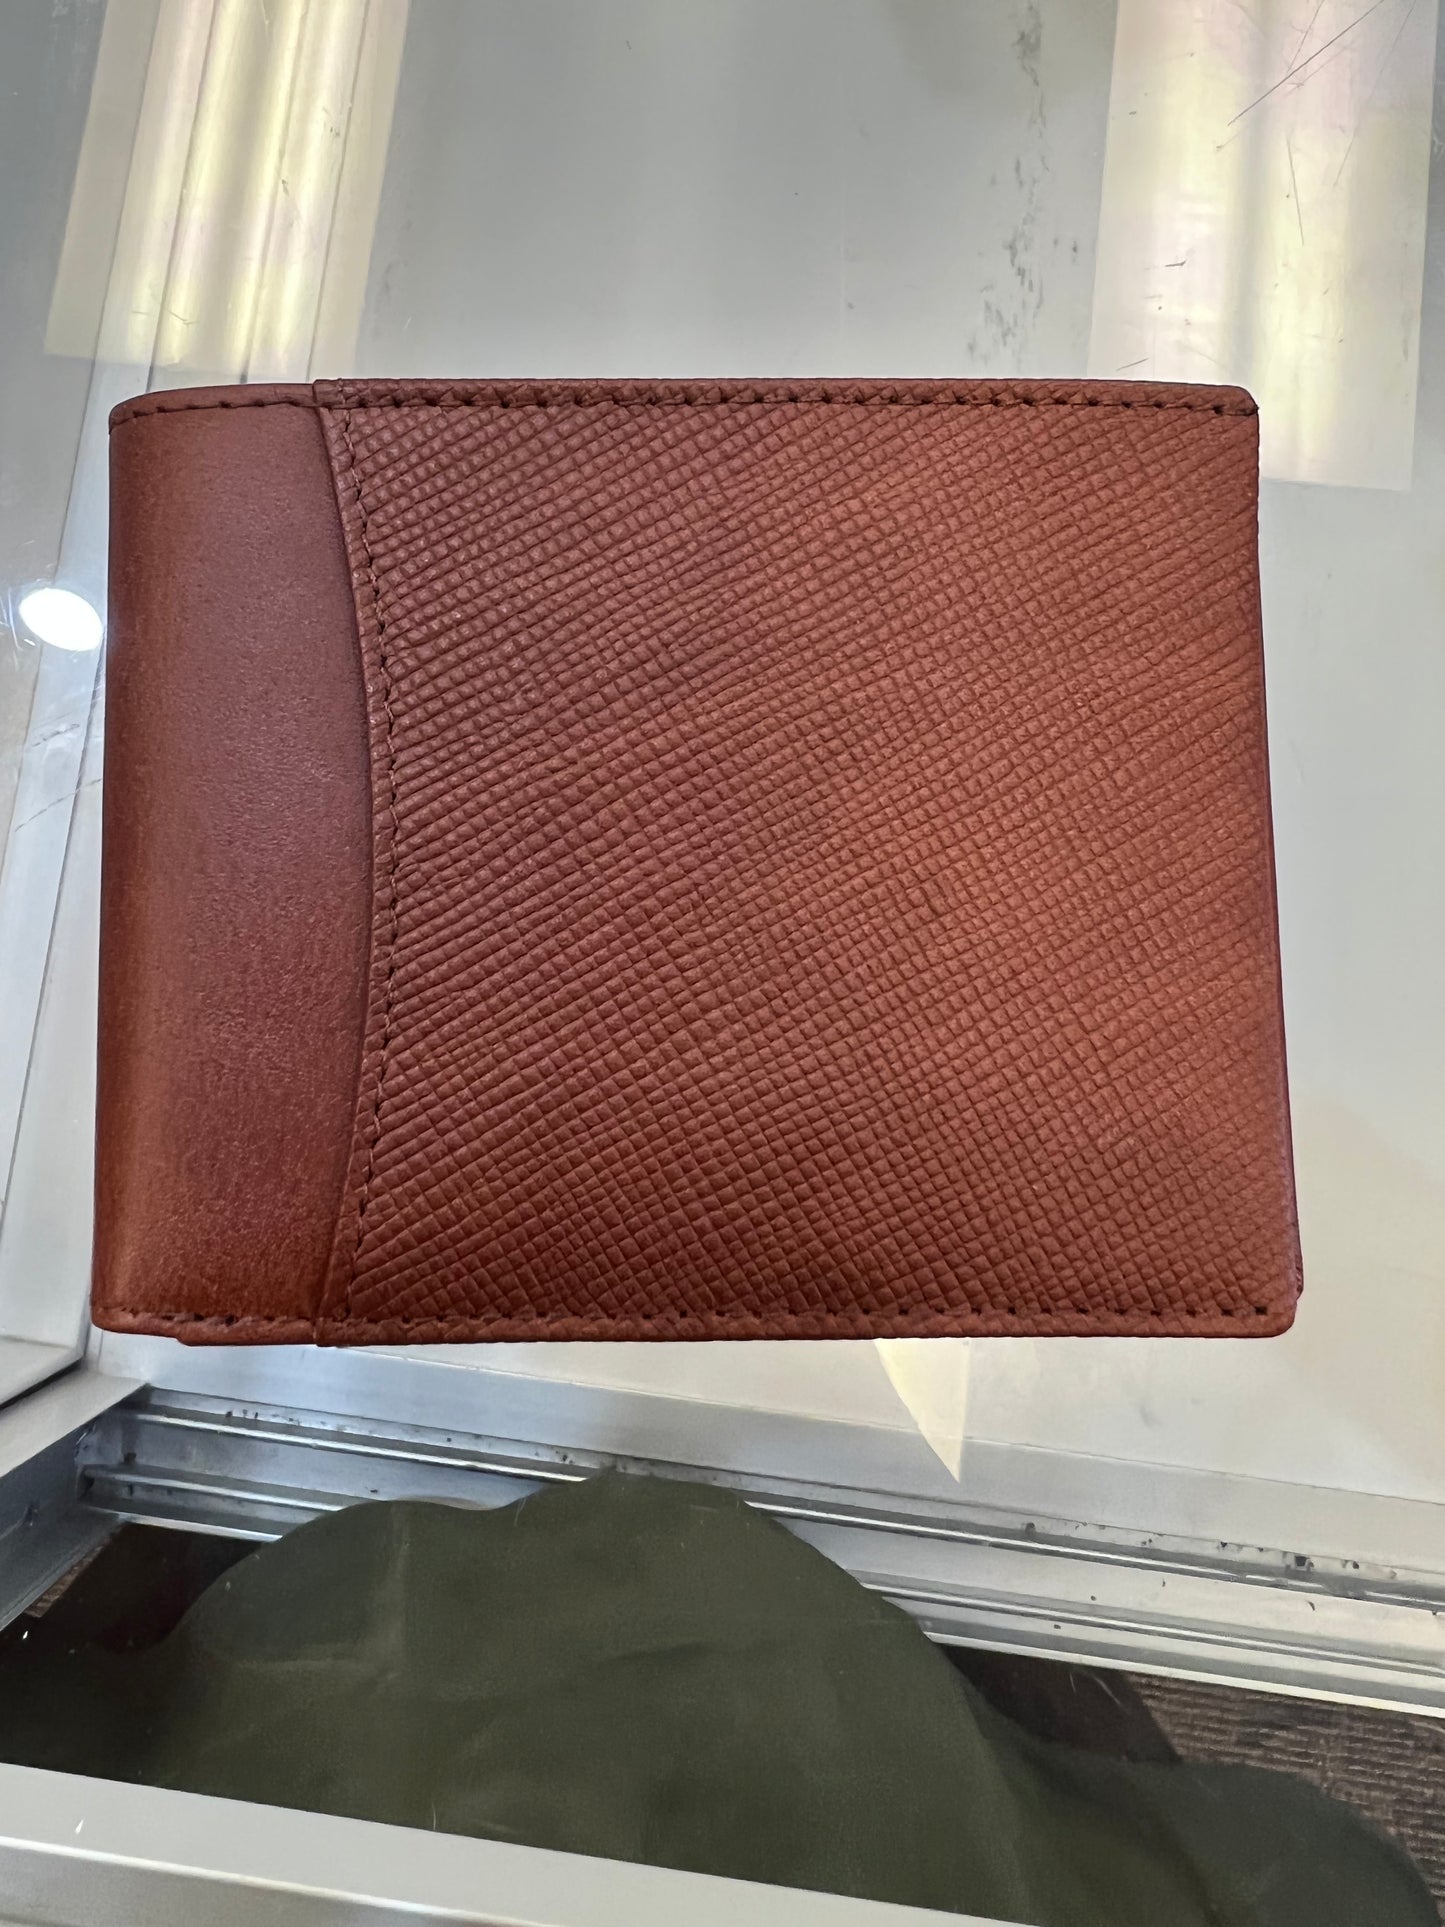 Bosca Executive ID Leather Wallet